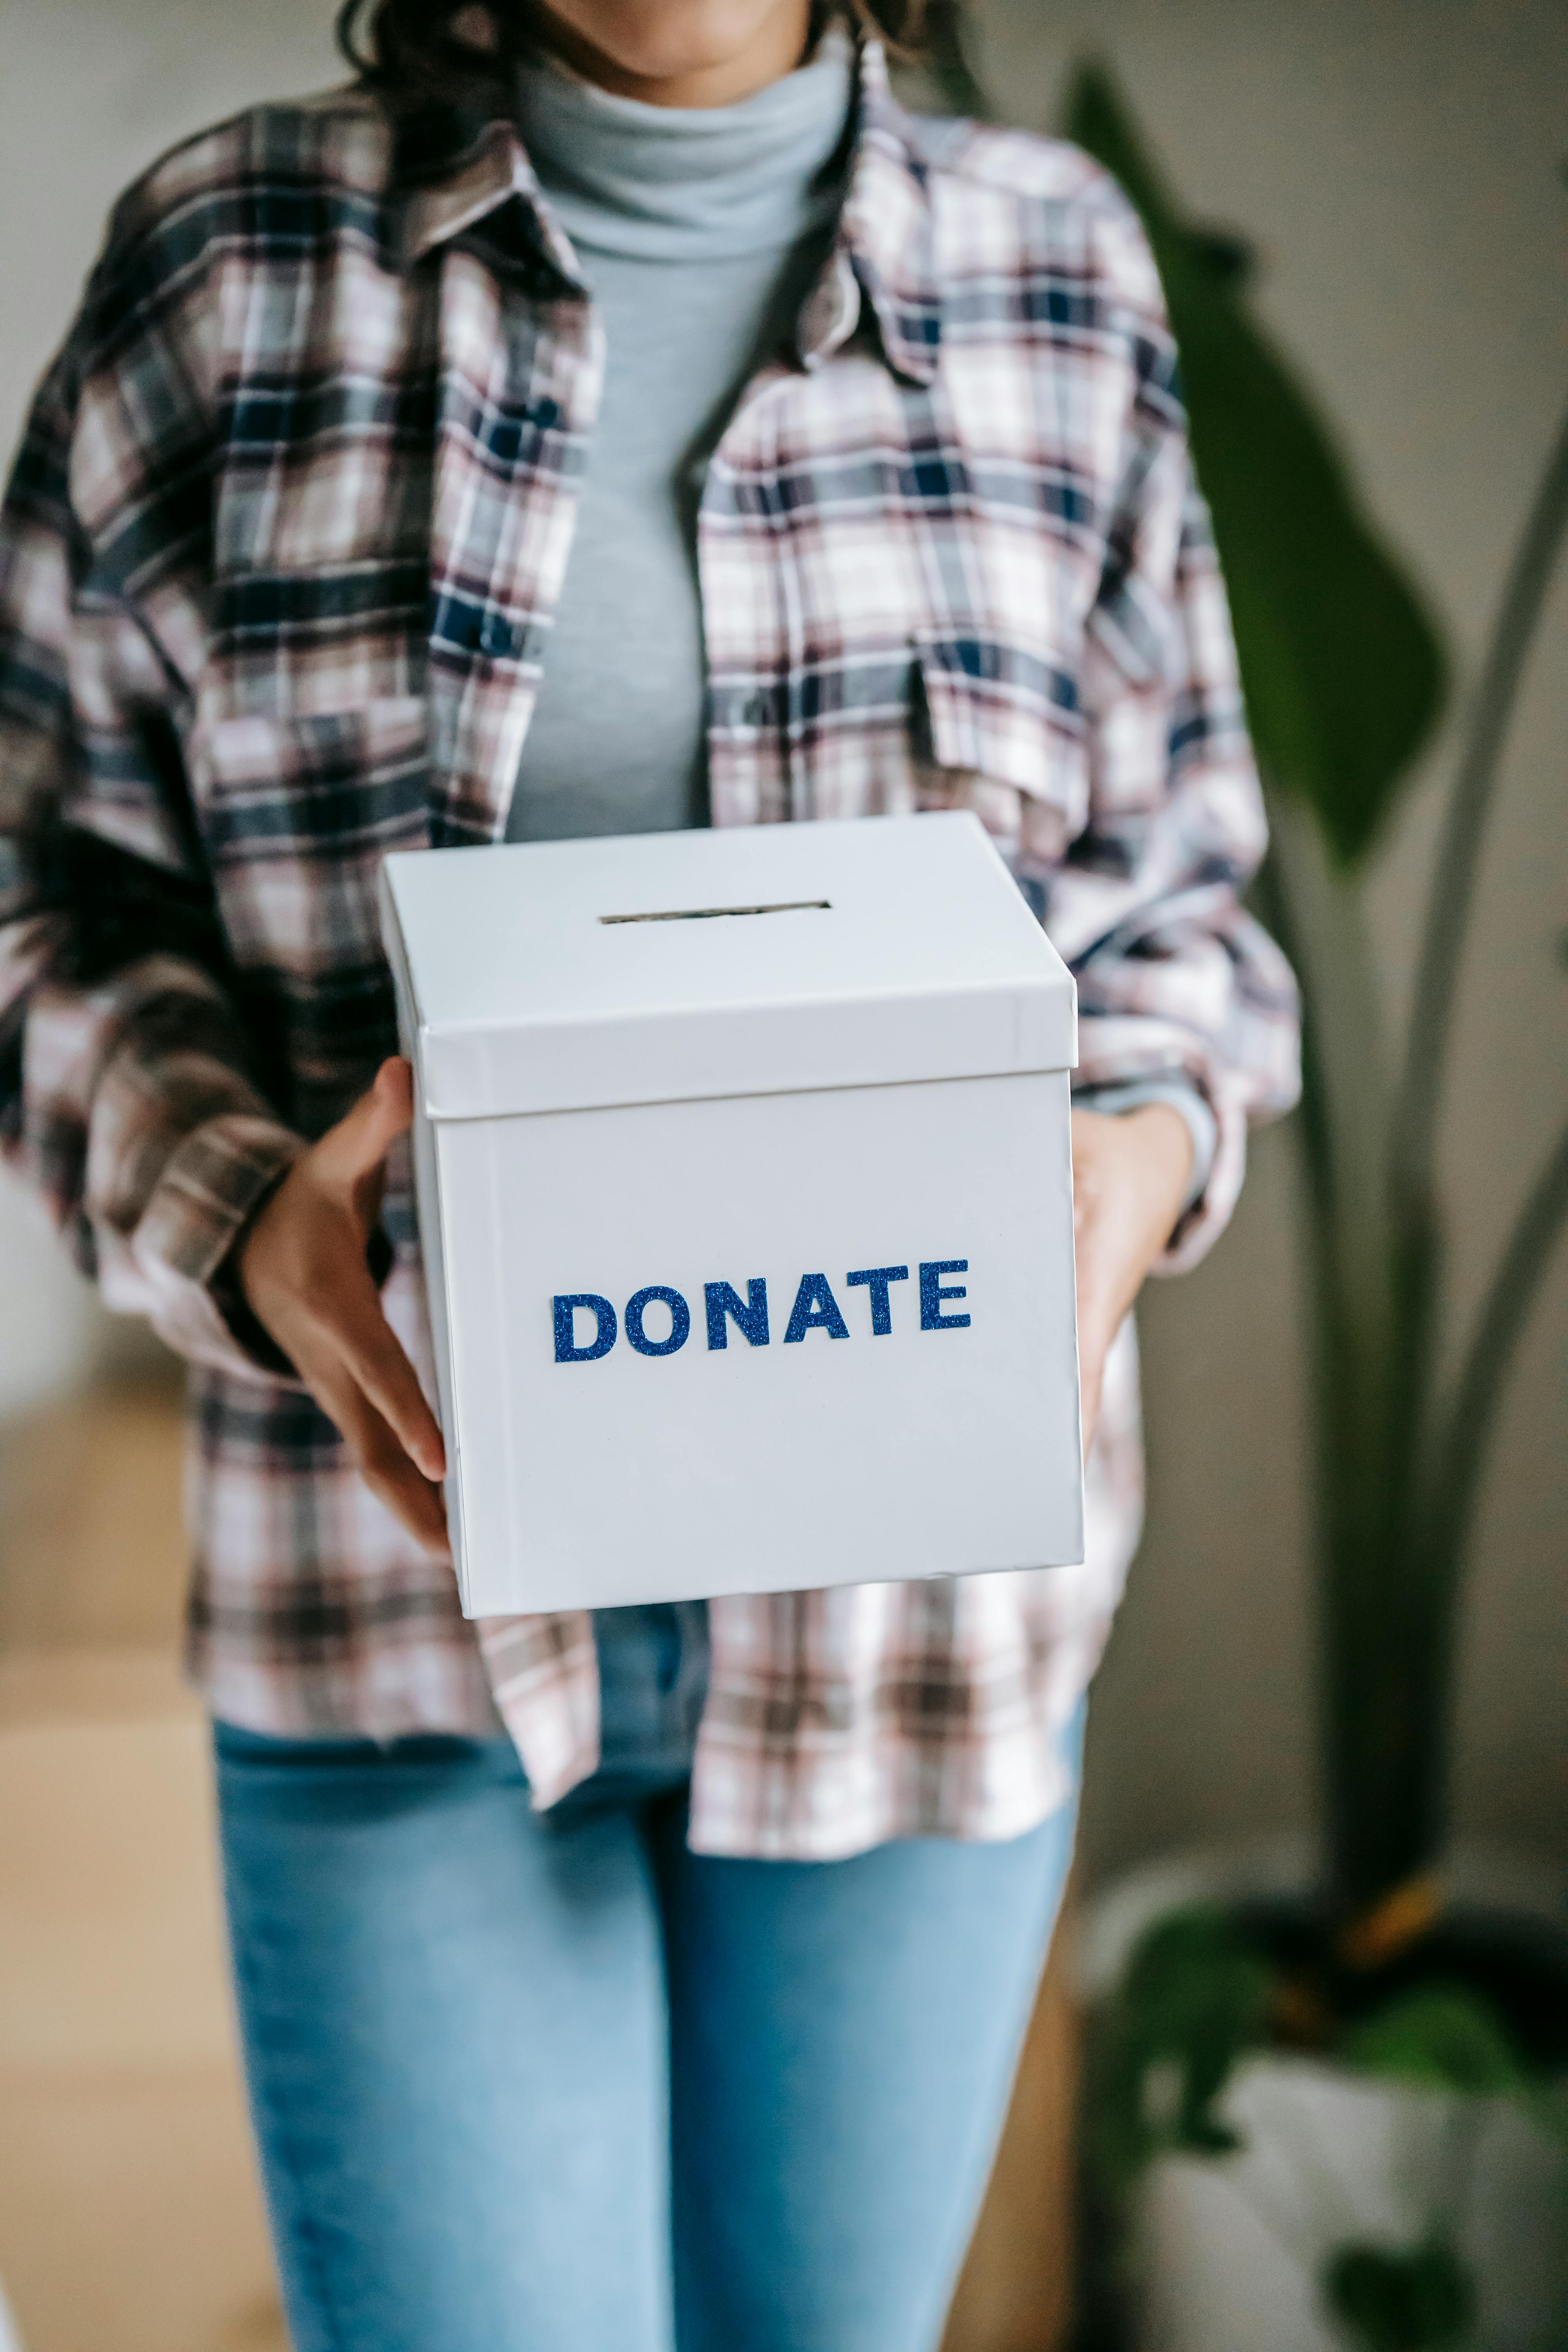 A woman holding a box that says "donate" | Source: Pexels